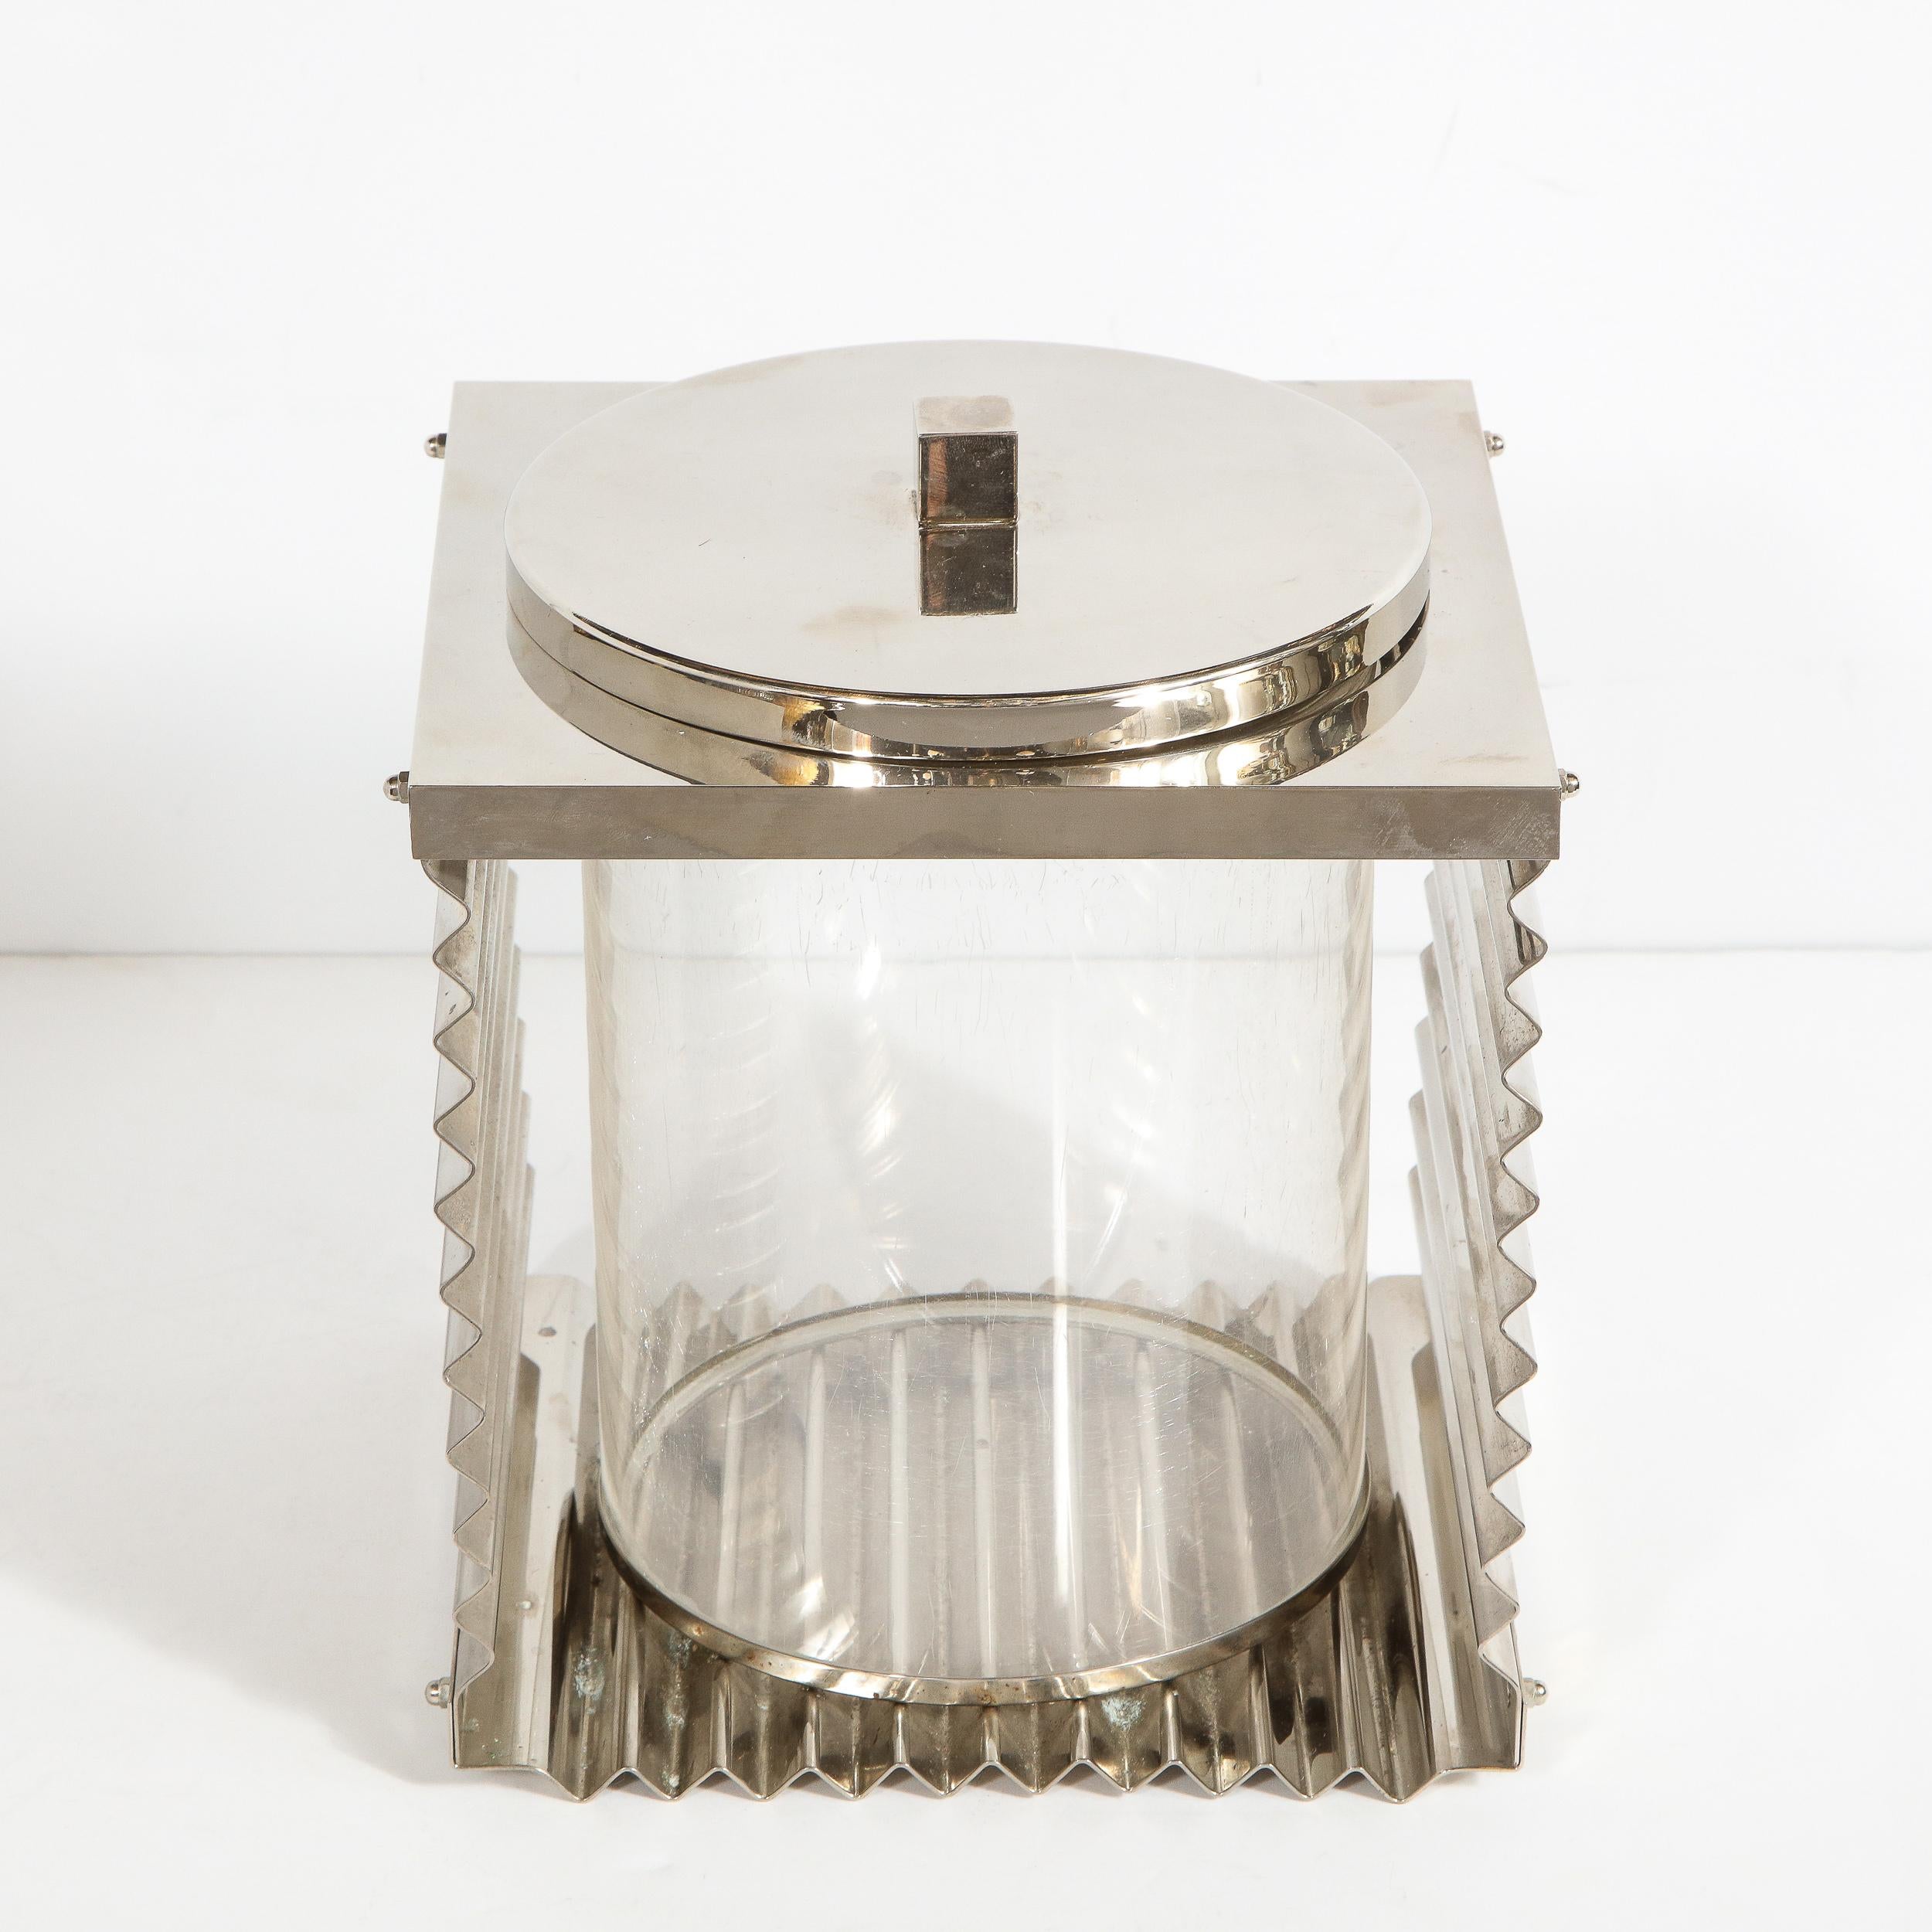 Italian Midcentury Chrome and Lucite Sculptural Ice Bucket by Montagnani of Firenze